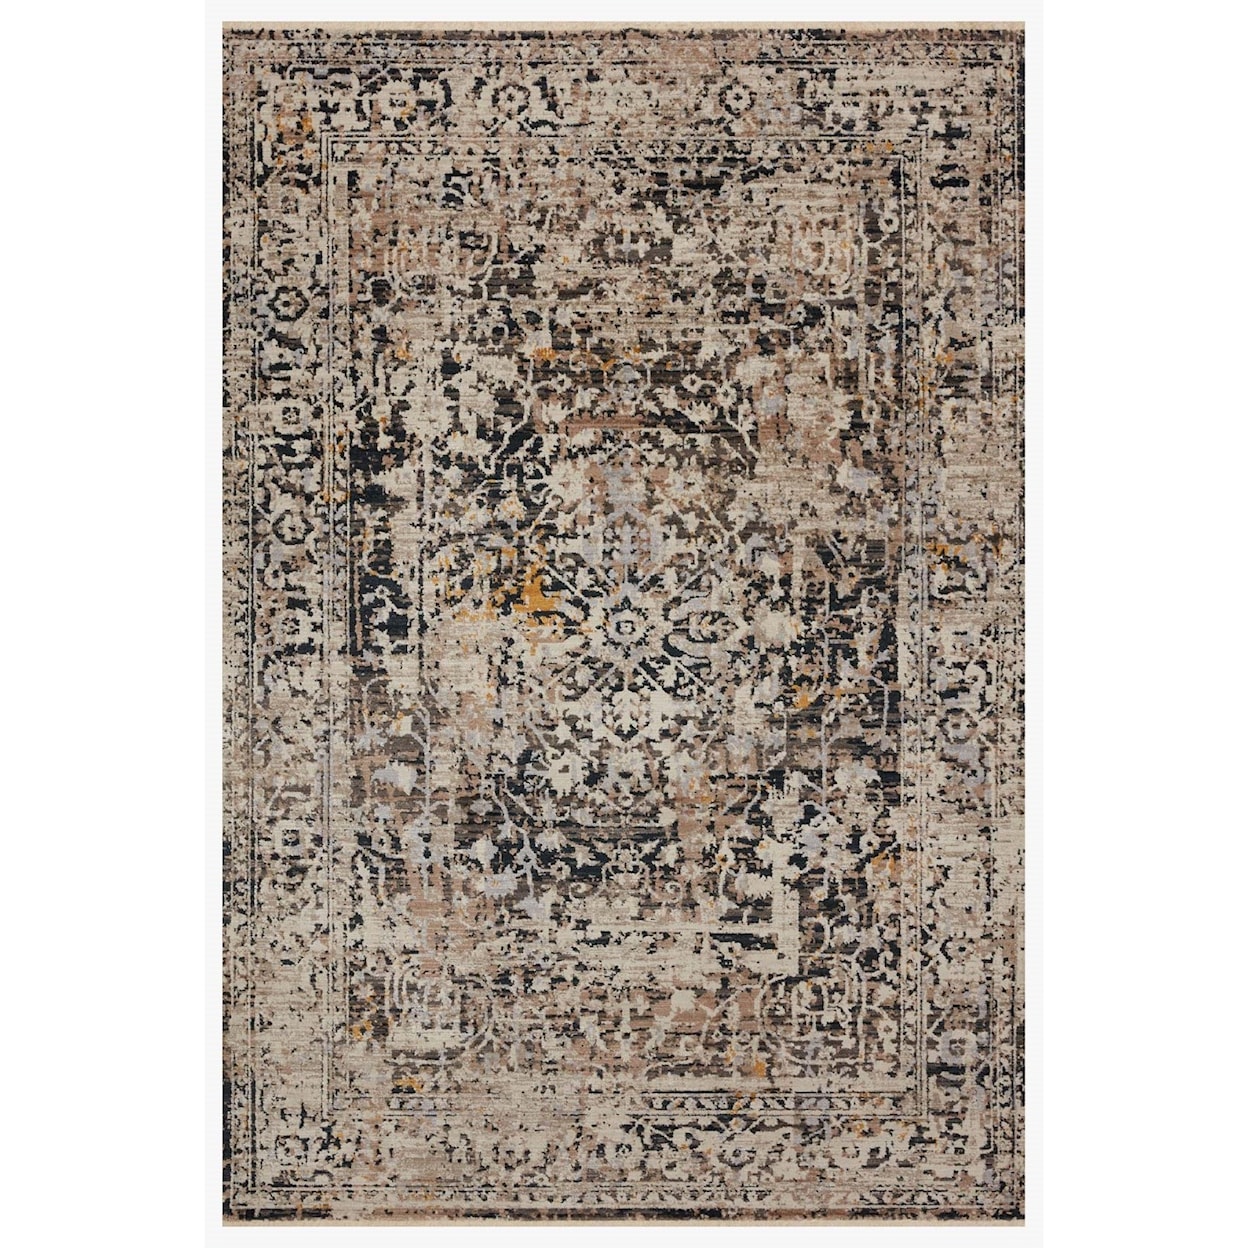 Reeds Rugs Leigh 4'0" x 5'5" Charcoal / Taupe Rug